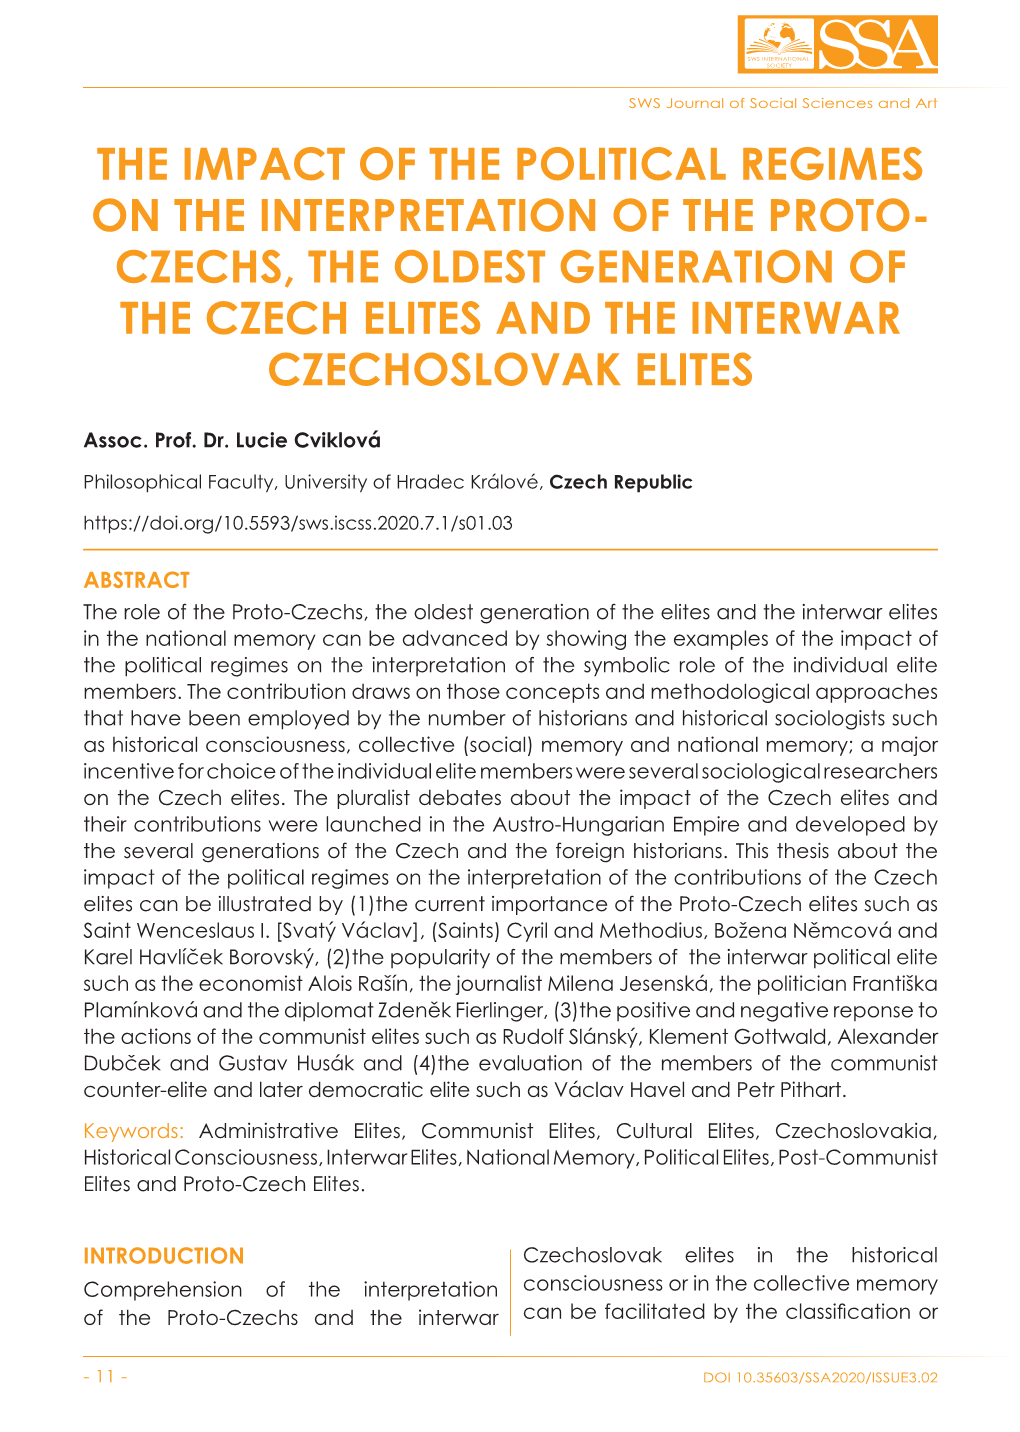 The Impact of the Political Regimes on the Interpretation of the Proto- Czechs, the Oldest Generation of the Czech Elites and the Interwar Czechoslovak Elites